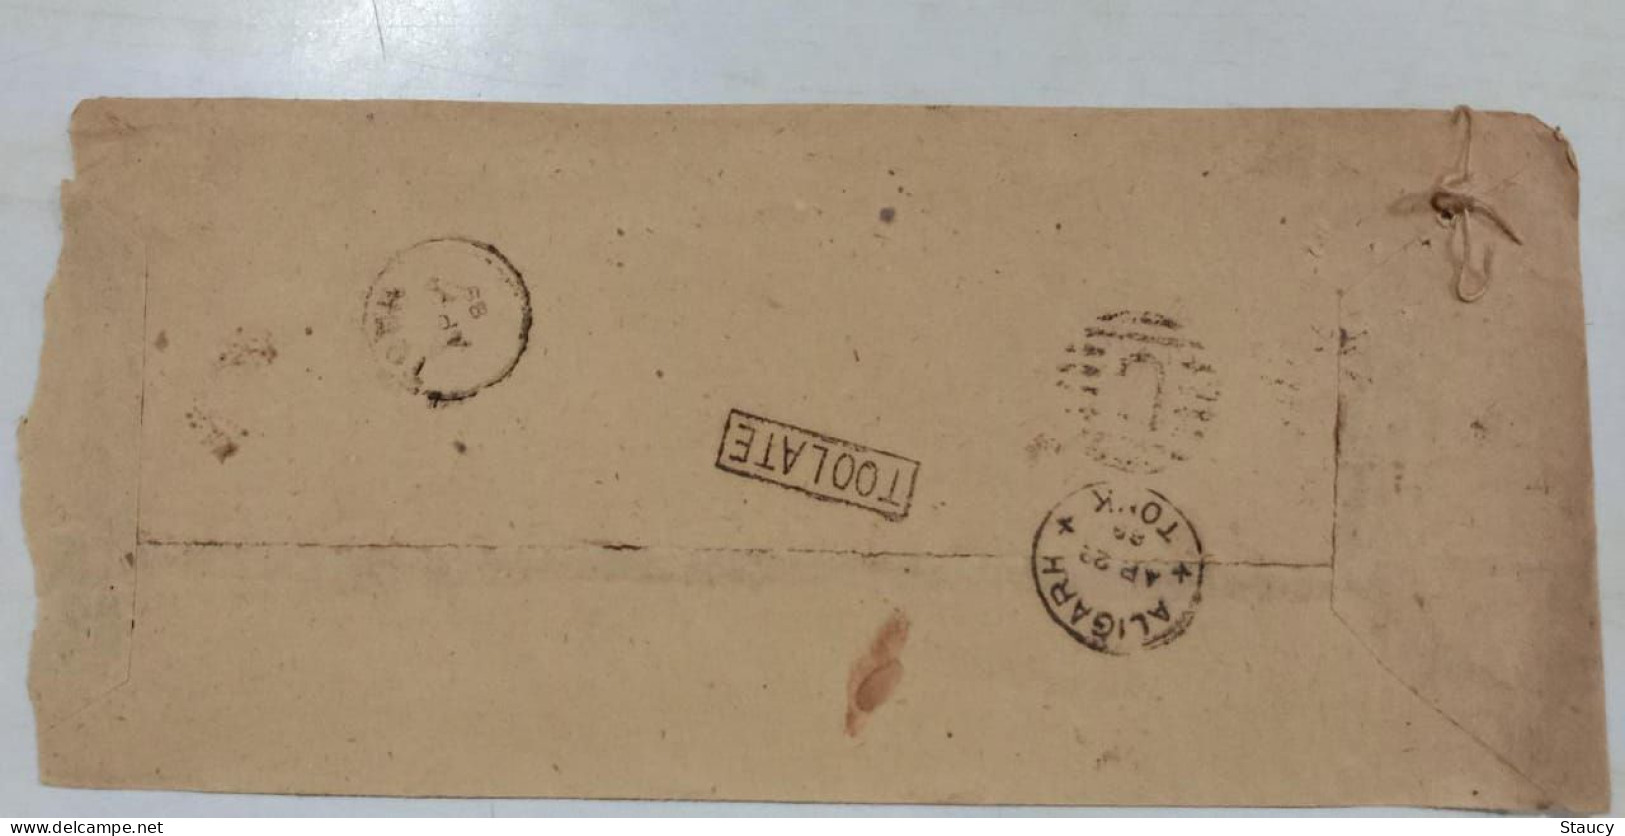 BRITISH INDIA 1889 QV 1/2a FRANKING On Registered "Jaypore State" Toolate COVER, NICE CANC ON FRONT & BACK As Per Scan - Jaipur